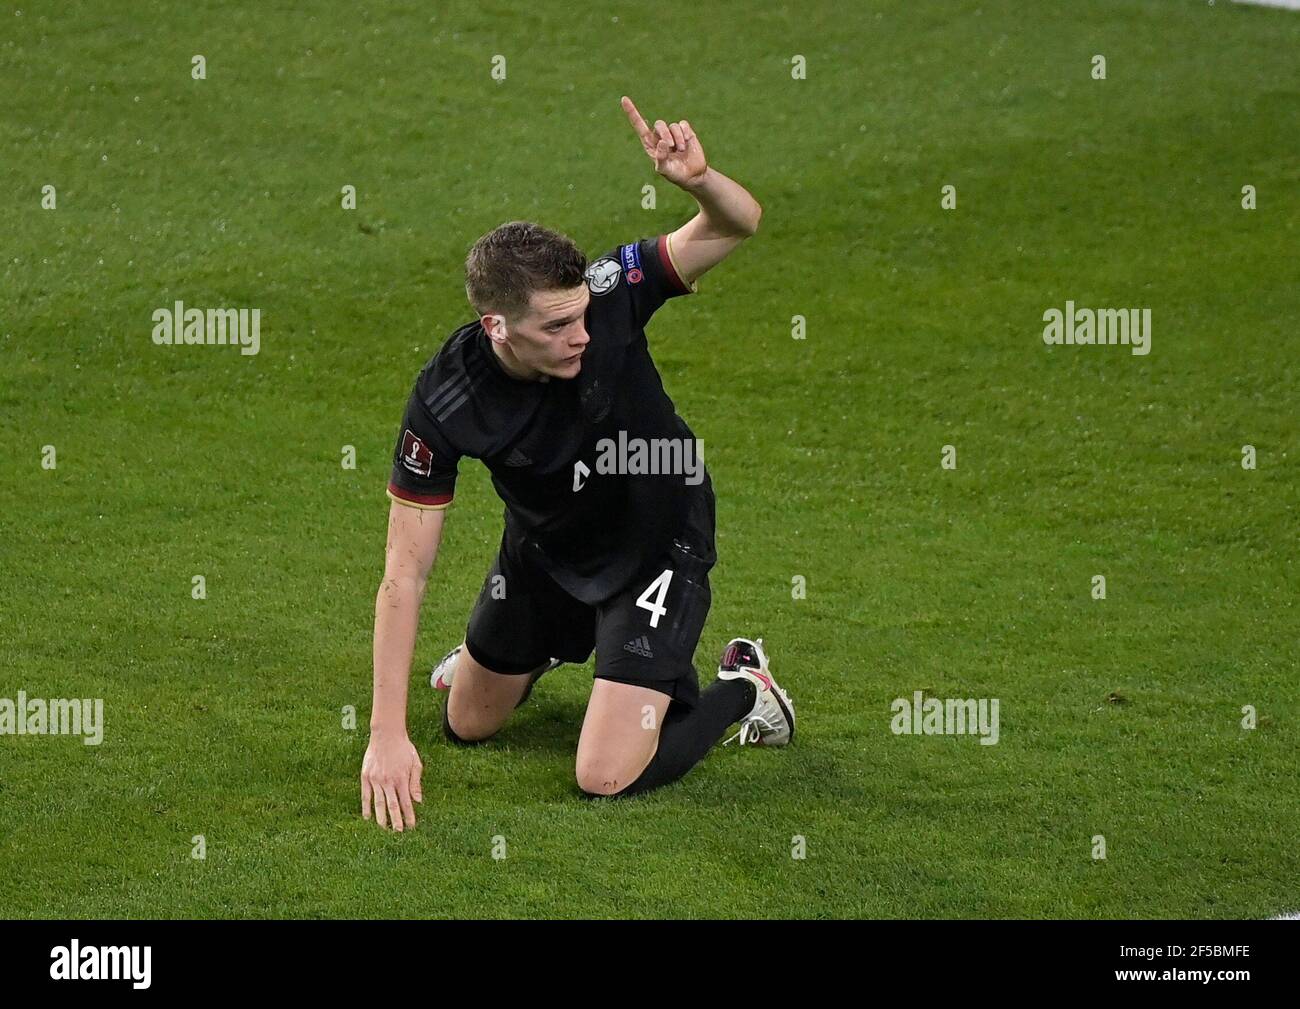 Soccer Football - World Cup Qualifiers Europe - Group J - Germany v Iceland - MSV-Arena, Duisburg, Germany - March 25, 2021 Germany's Matthias Ginter reacts REUTERS/Tobias Schwarz Stock Photo